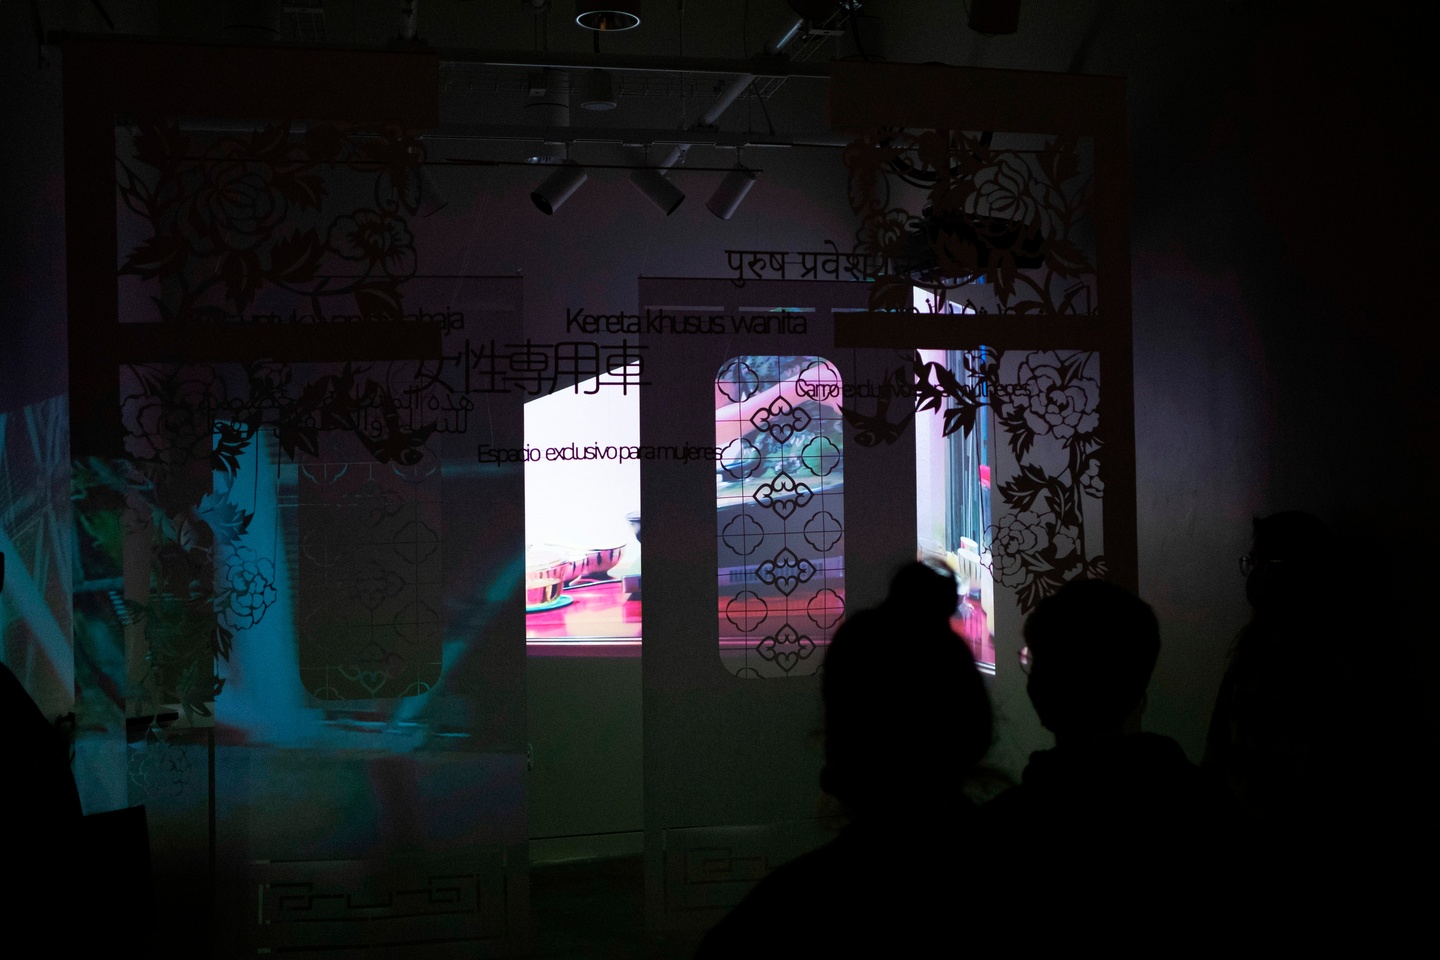 Installation room with projections on floral and text paper cutouts 